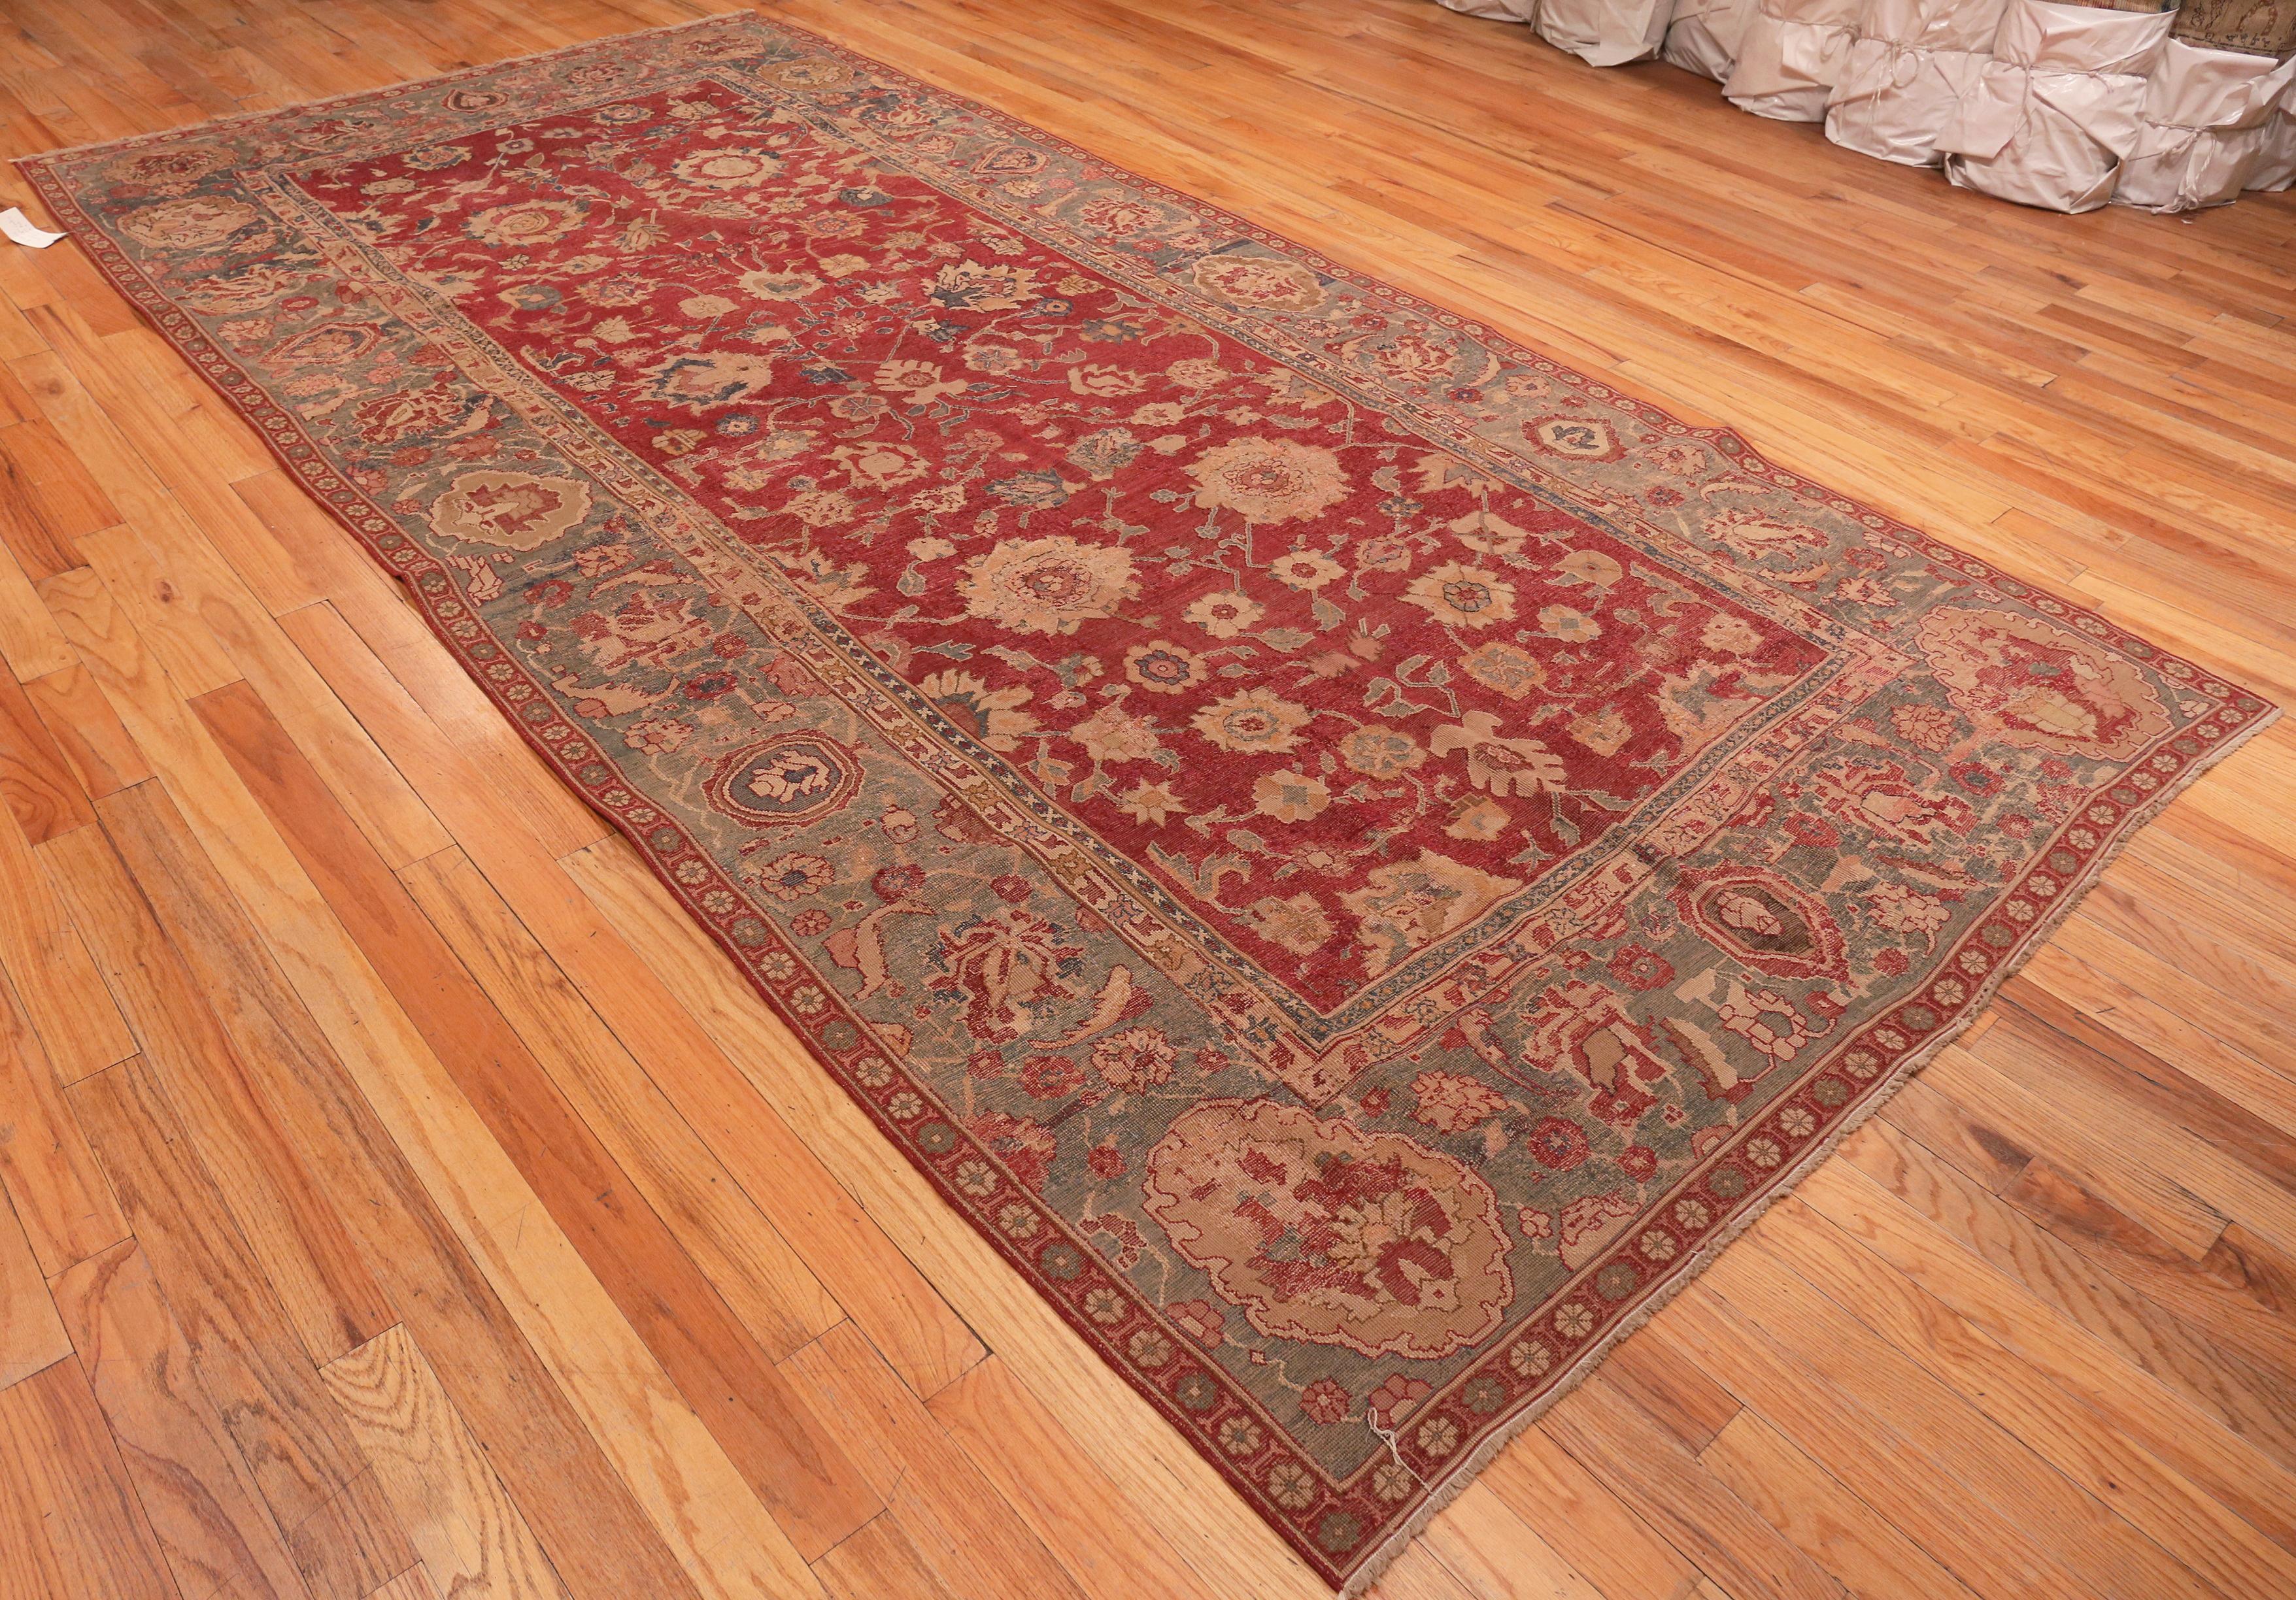 Wool 17th Century Antique Indian Mughal Rug 6 ft 7 in x 13 ft For Sale